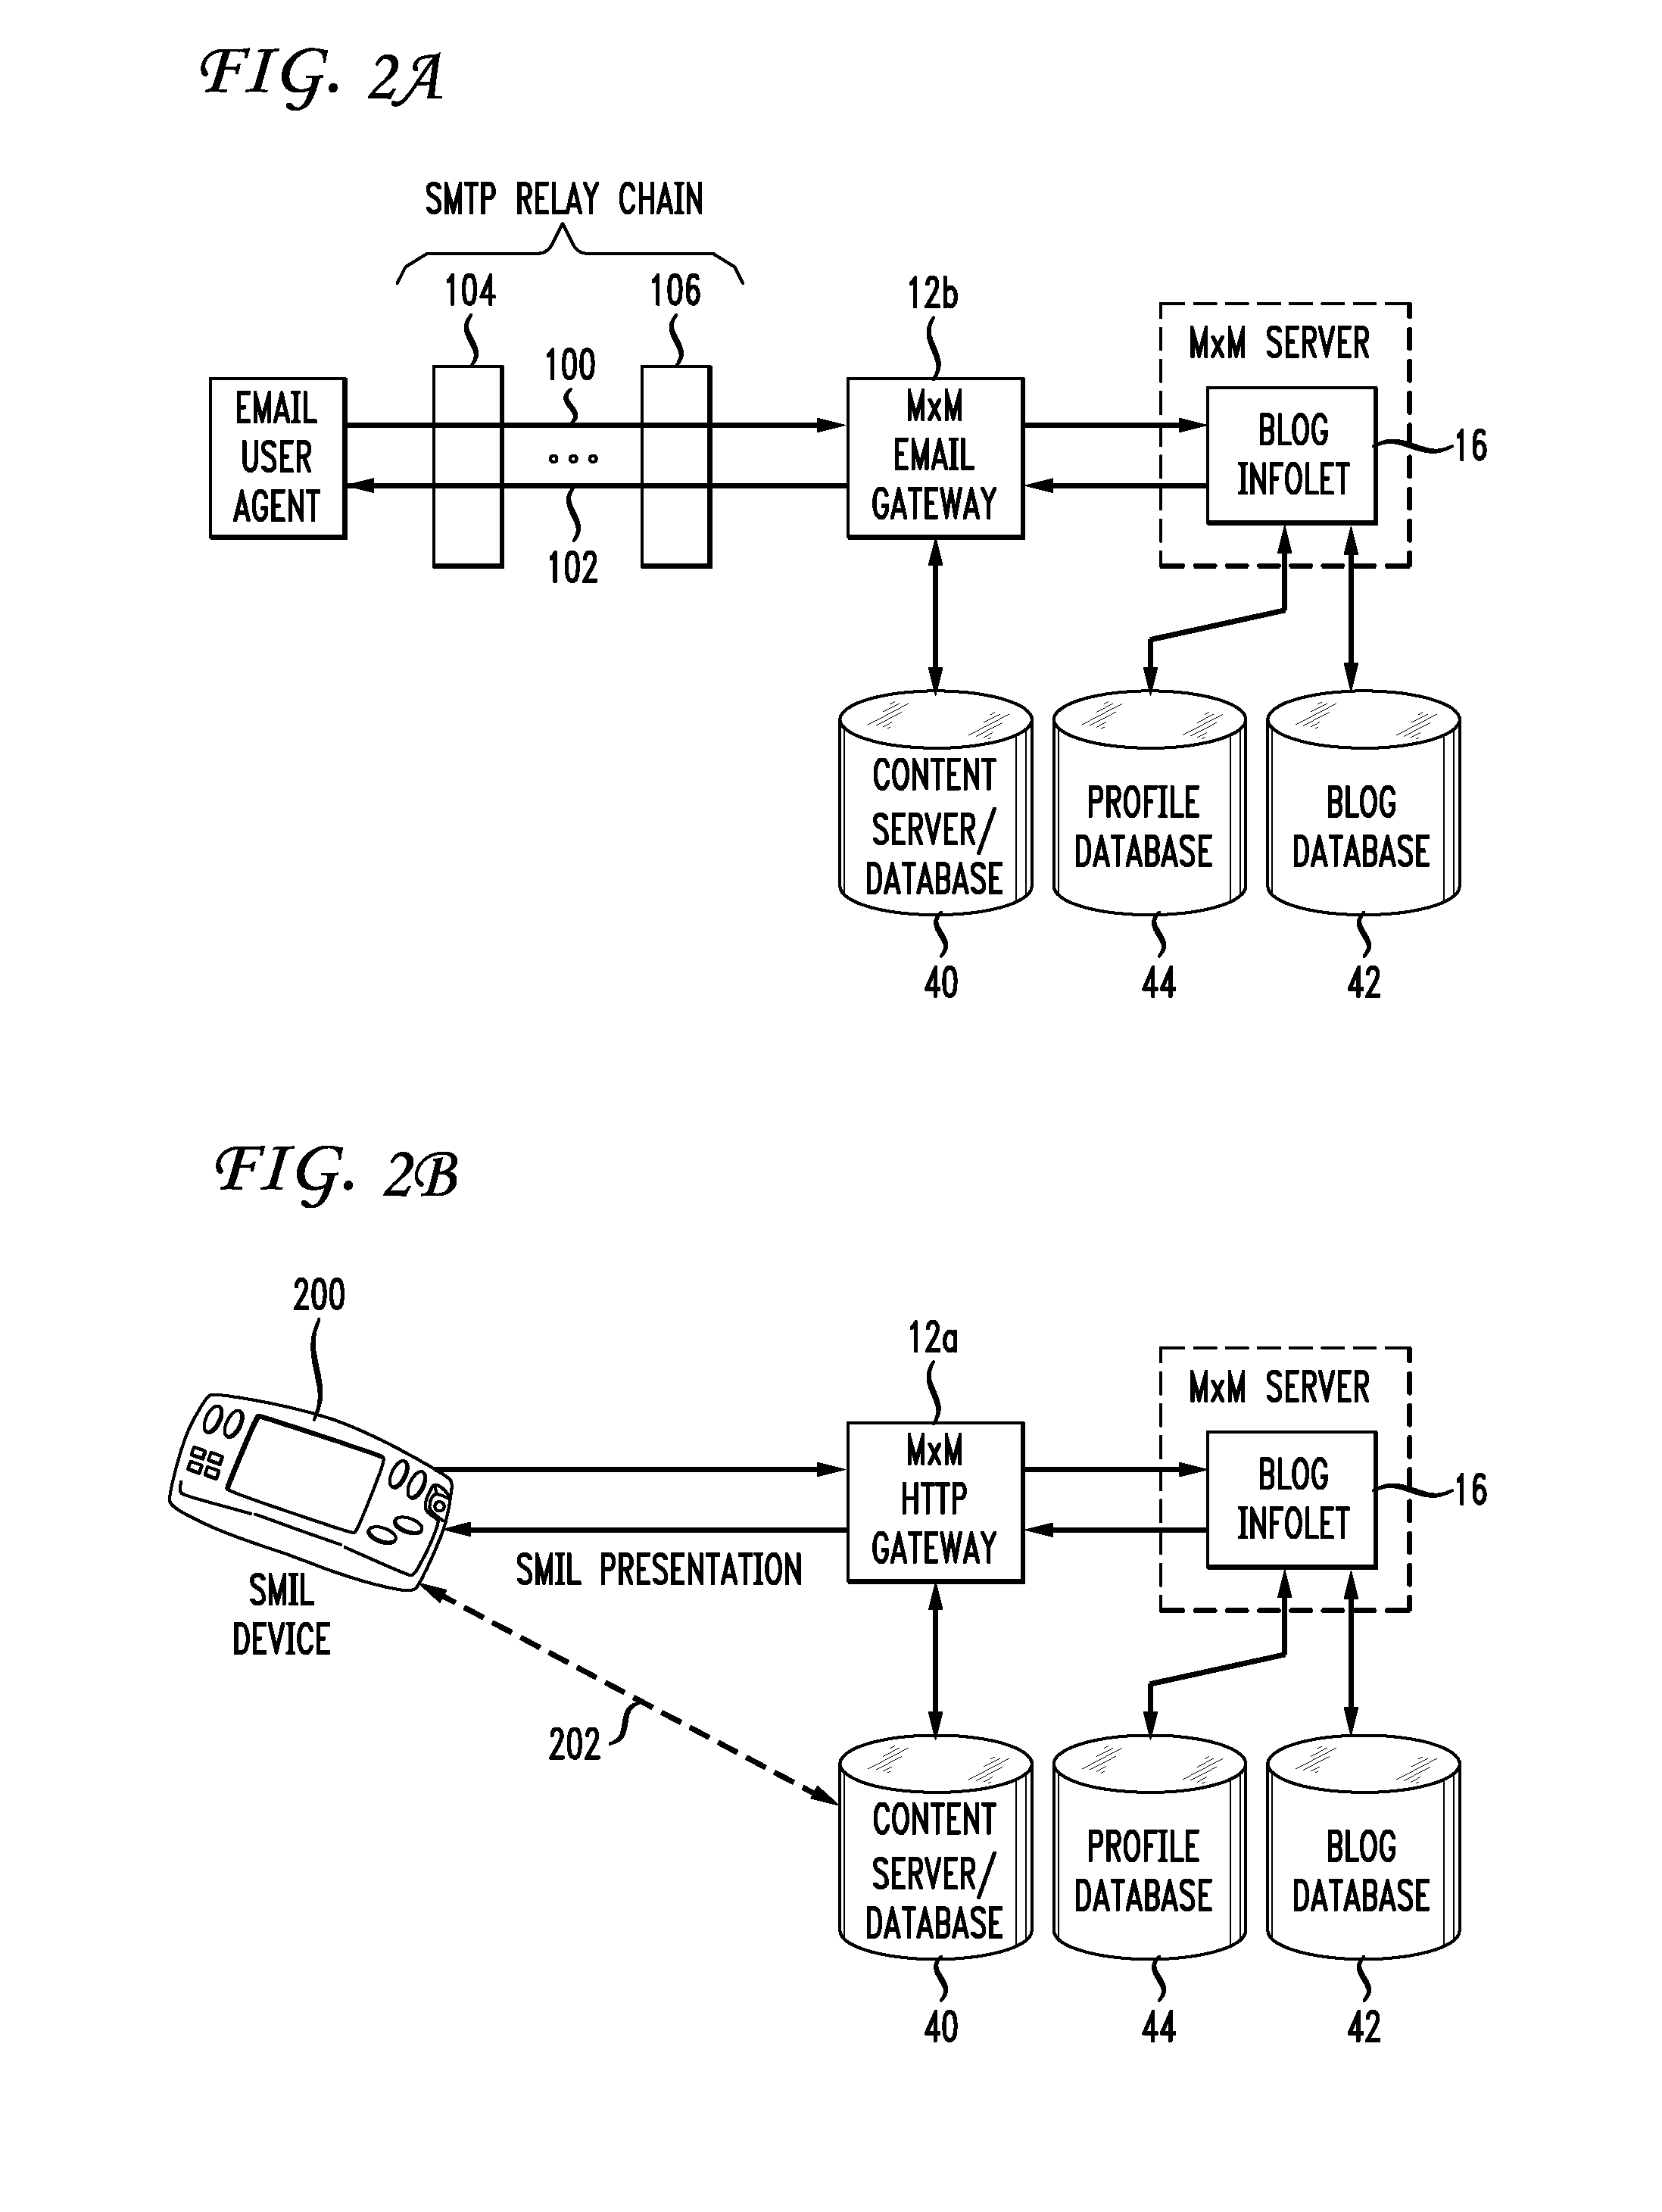 System and method of collecting, correlating, and aggregating structured edited content and non-edited content